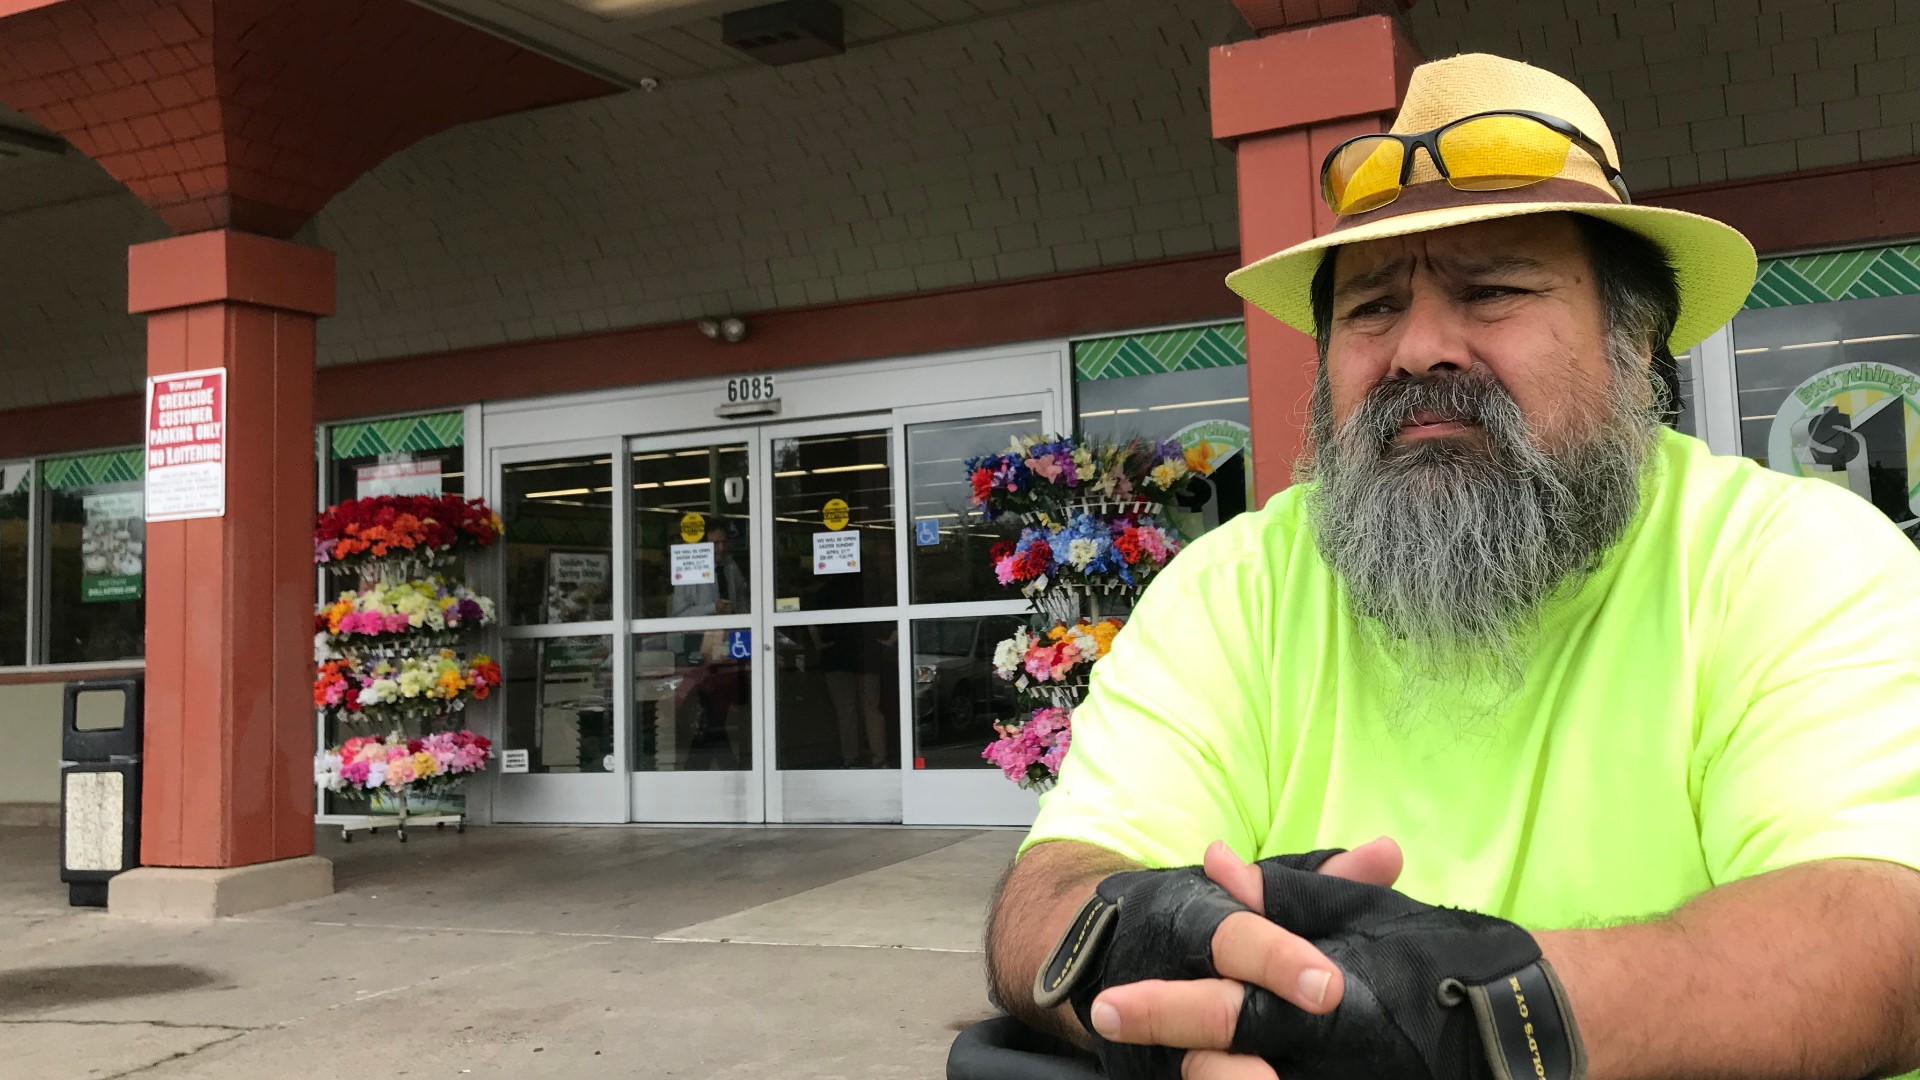 Despite not being able to walk, Alfred "Snack Man" Sanchez goes out every day to bring the homeless of Citrus Heights food and companionship. He says he does it because he can't just walk away and do nothing.